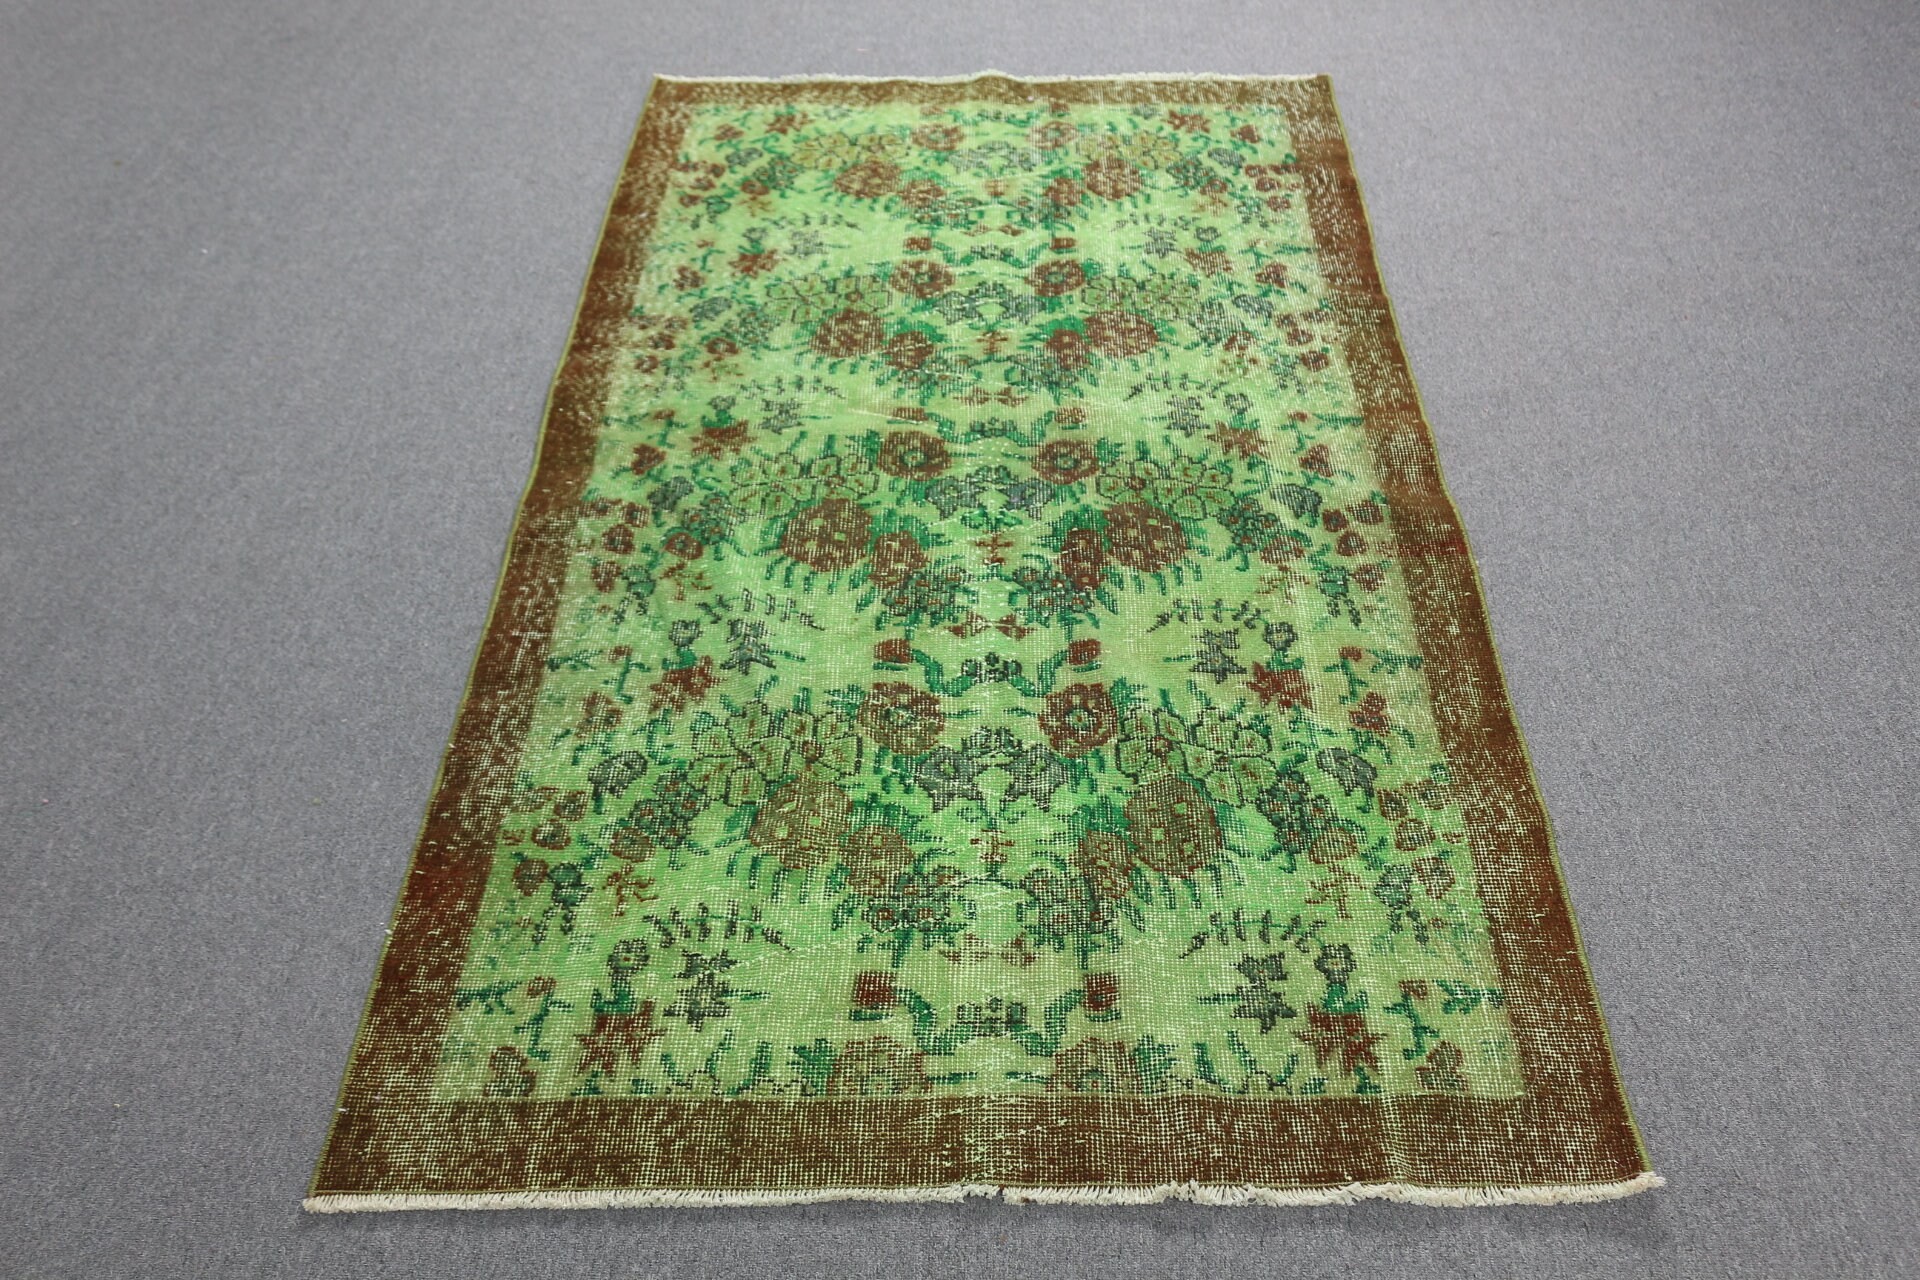 Vintage Rug, Rugs for Nursery, Green  3.6x6.5 ft Accent Rug, Kitchen Rug, Entry Rug, Cool Rug, Turkish Rugs, Moroccan Rug